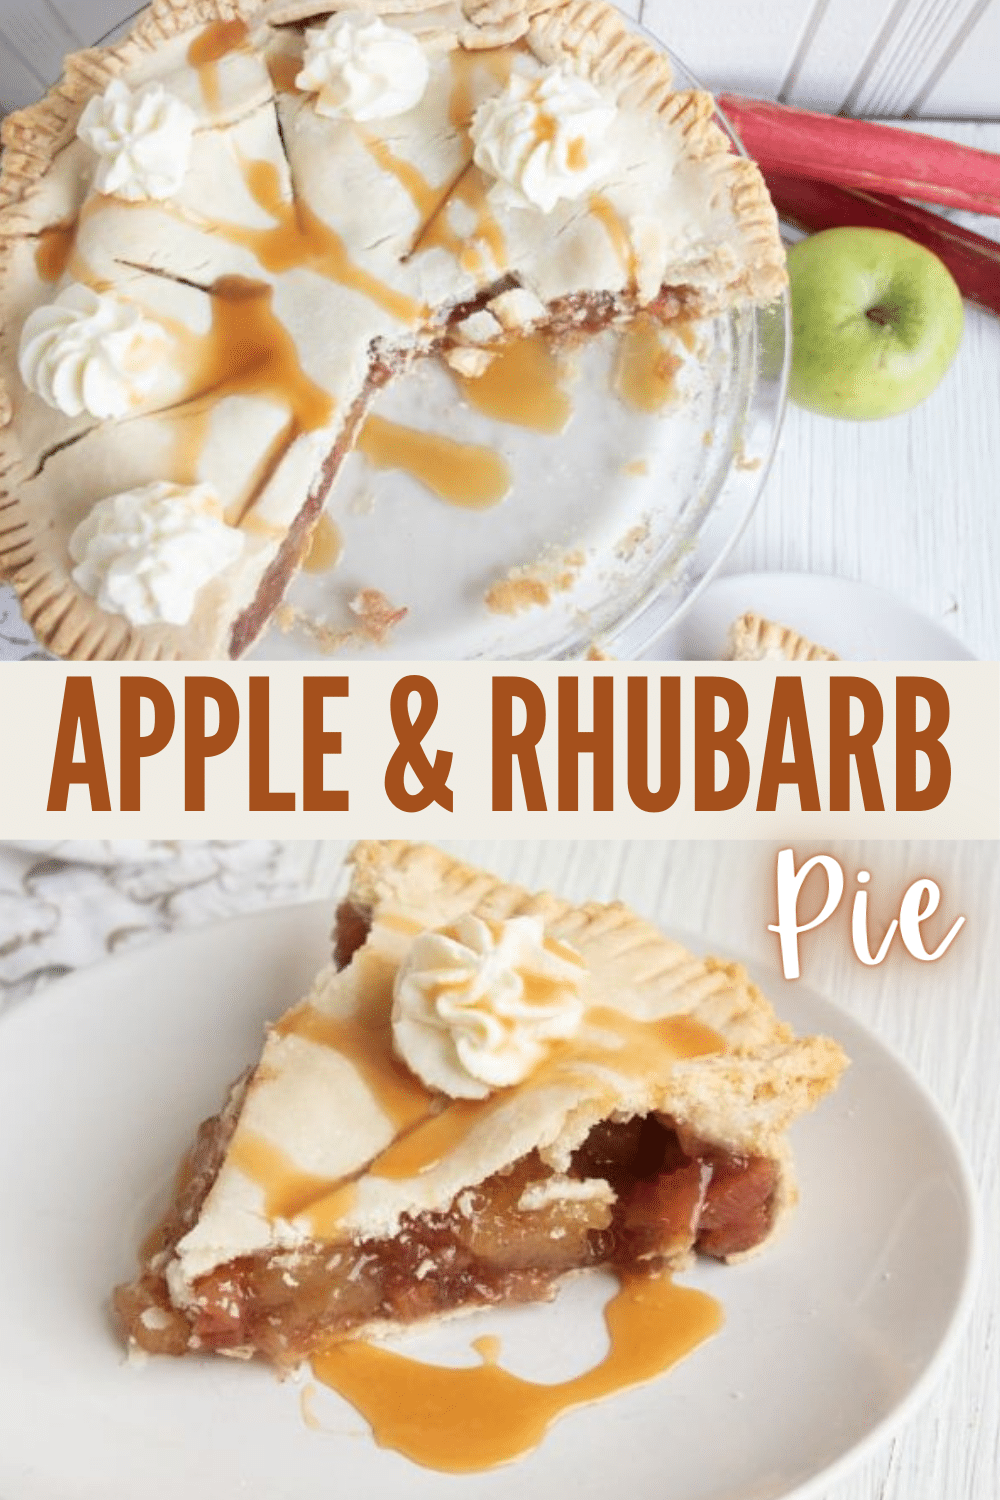 Apple and Rhubarb Pie is the perfect dessert for fall and Thanksgiving. This delicious pie is full of fruit and flavor and looks amazing on your table. #apples #rhubarb #pie via @wondermomwannab